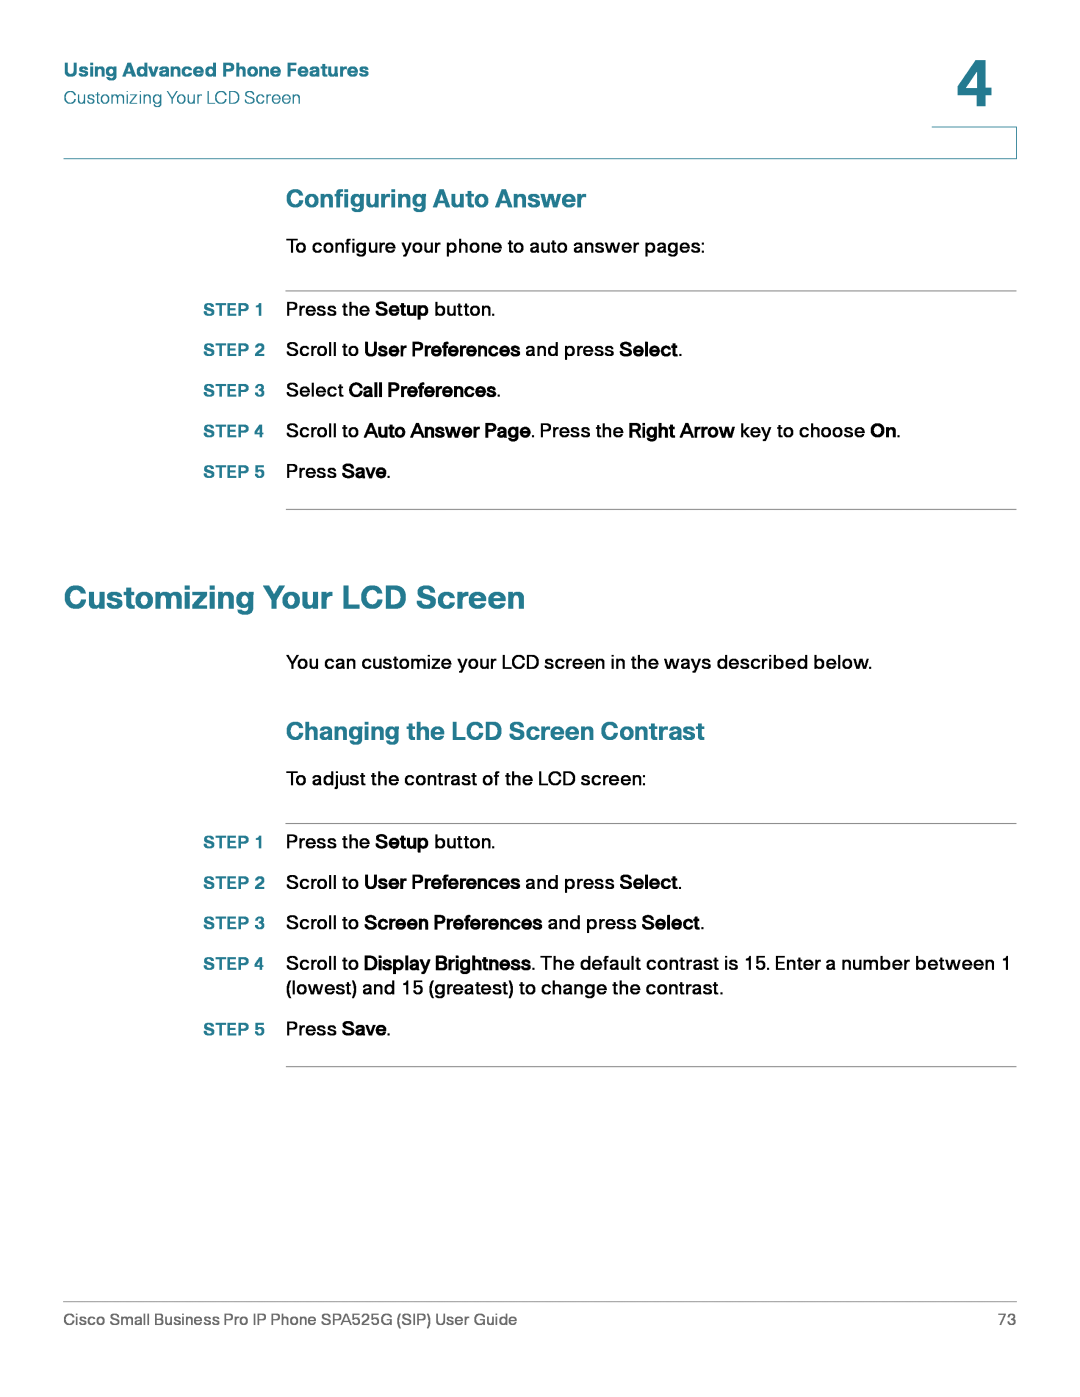 Cisco Systems SPA525G manual Customizing Your LCD Screen, Configuring Auto Answer, Changing the LCD Screen Contrast 